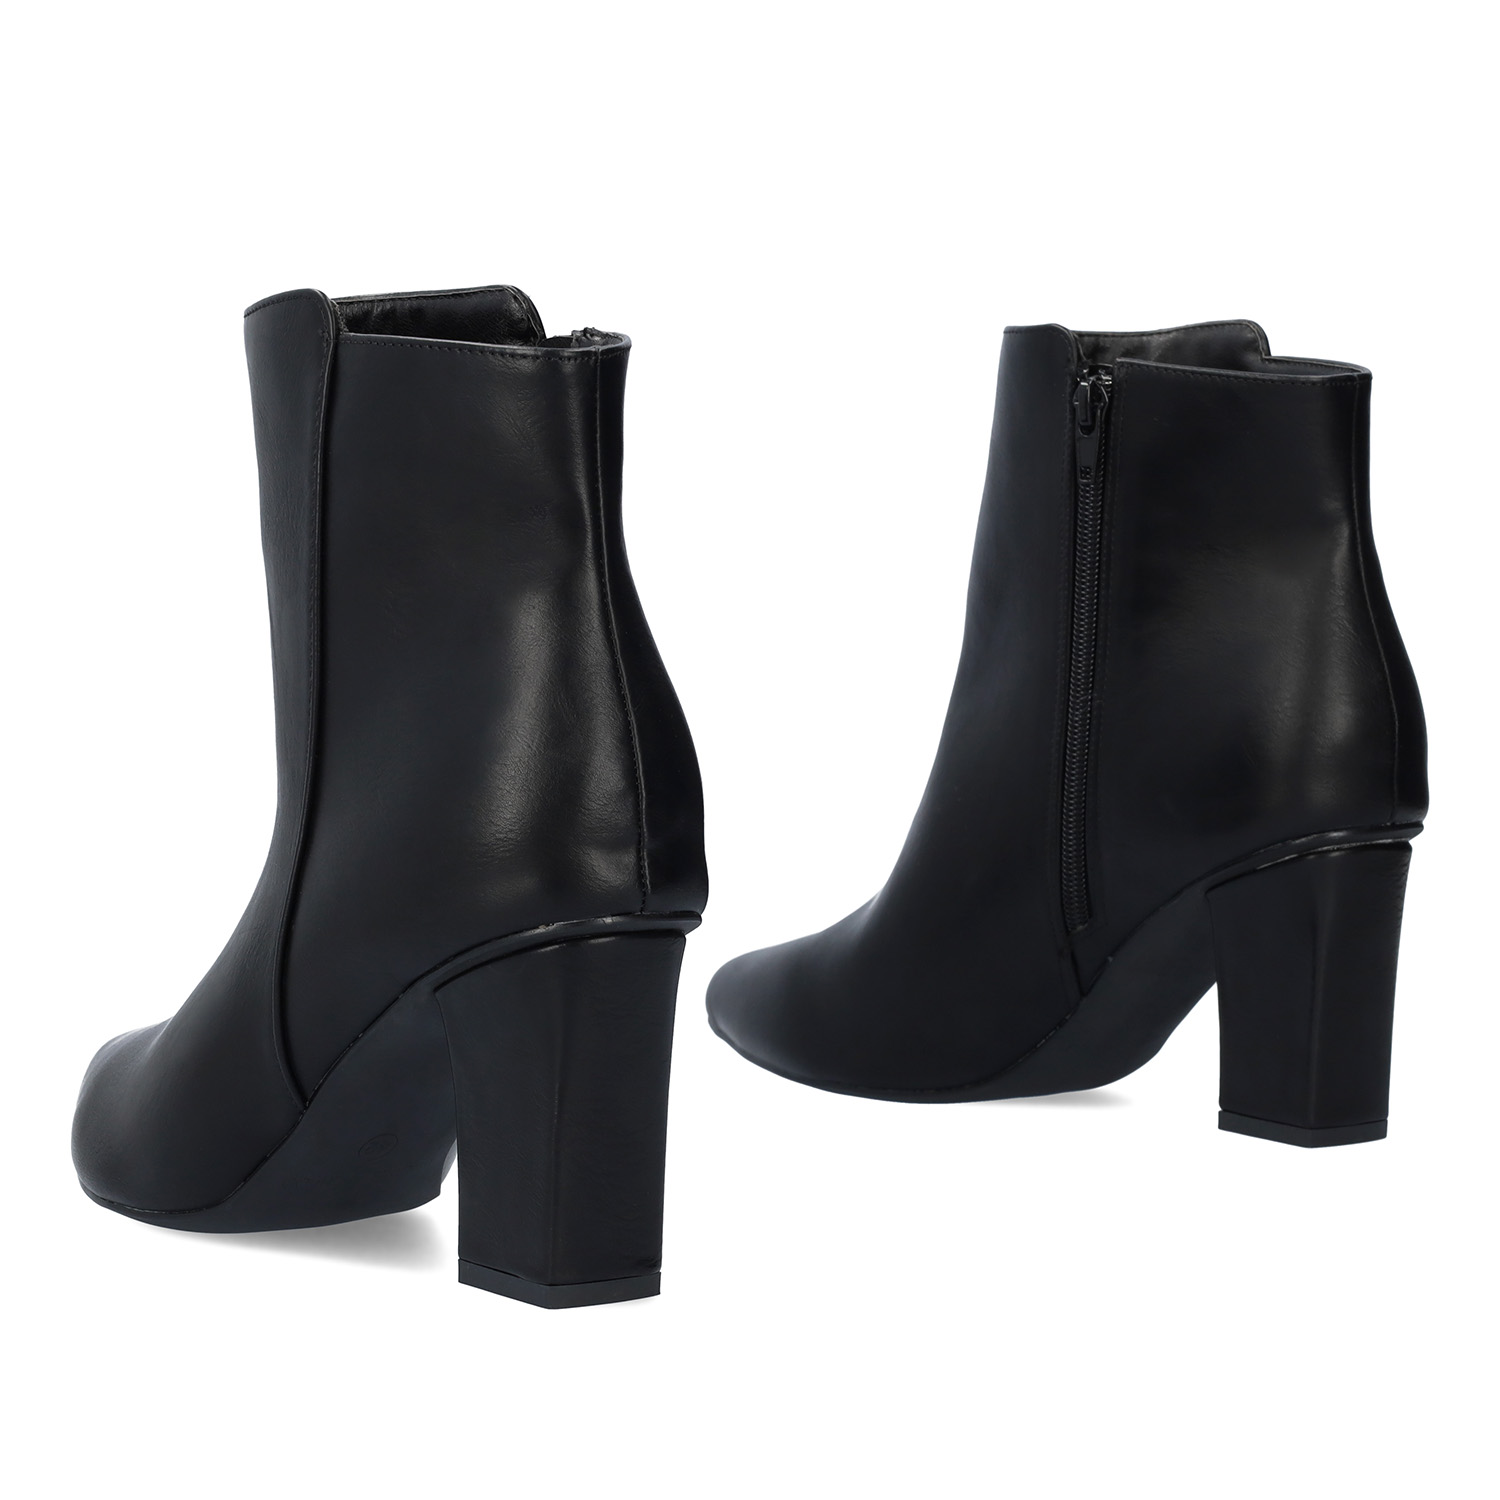 Heeled booties in black faux leather. 